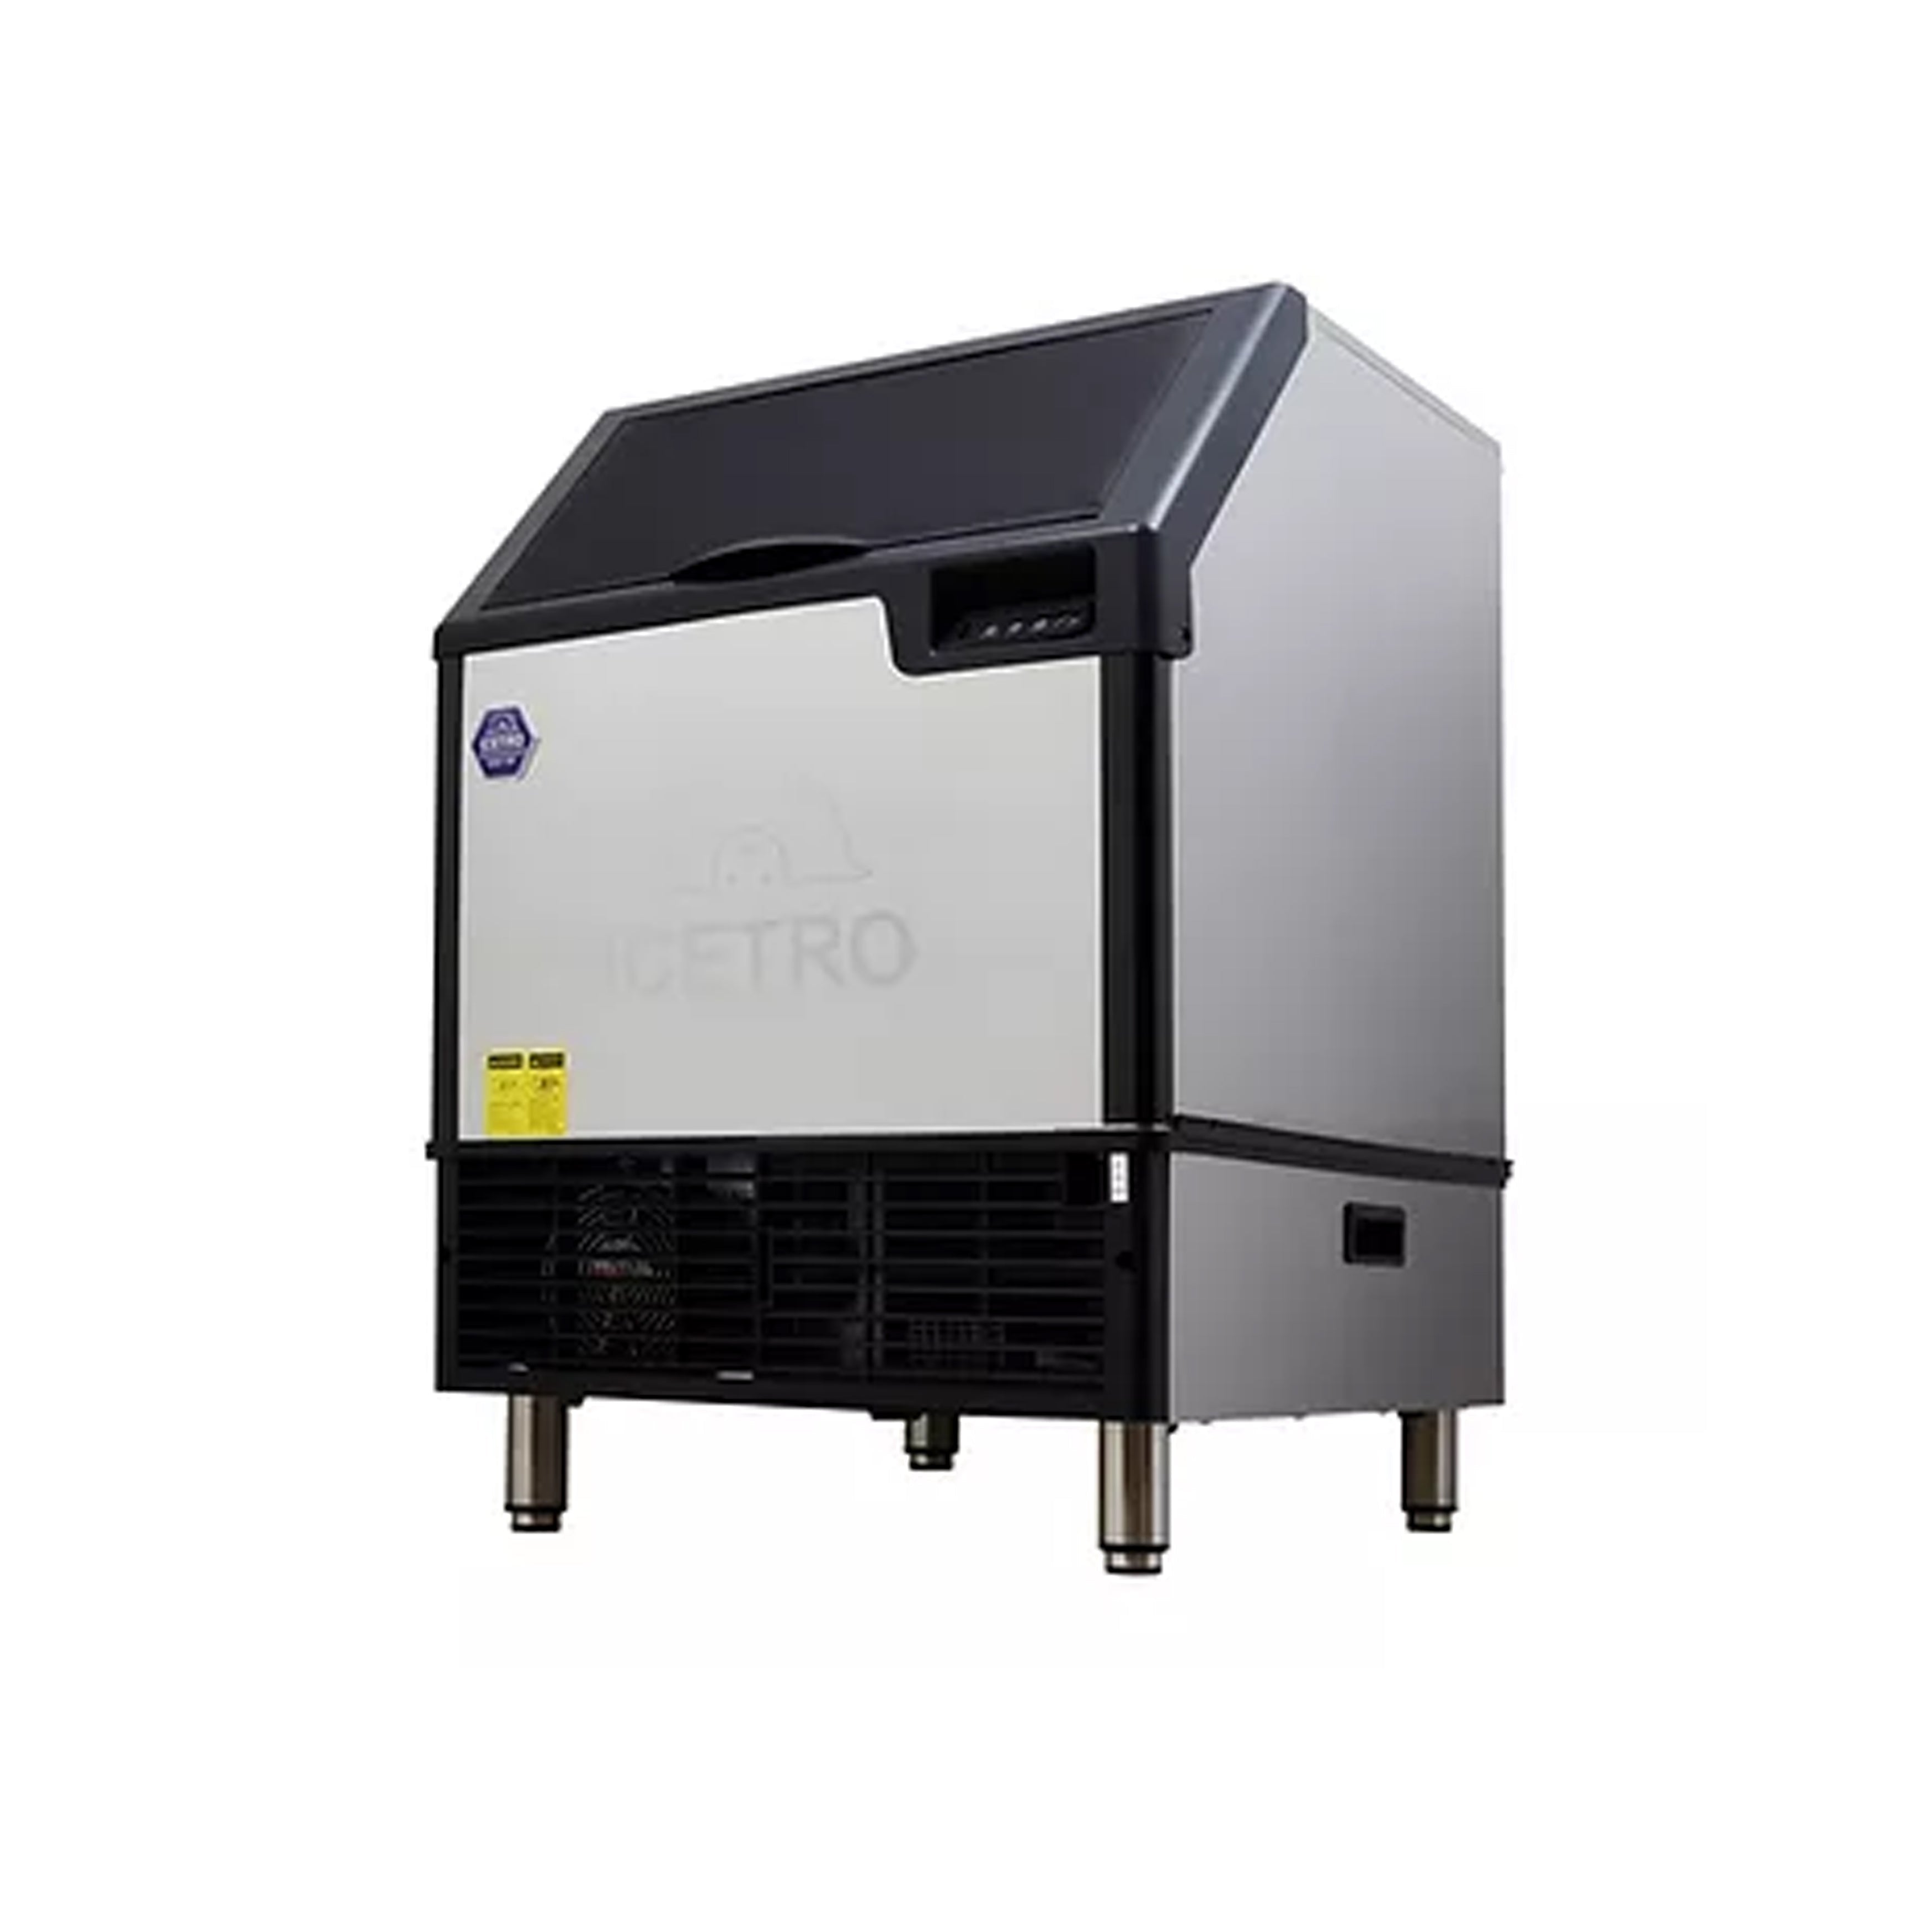 Icetro - IU-0170-AC, Commercial 77lbs Undercounter Air Cooled Ice Machine Ice Cube & Half Cube Maker